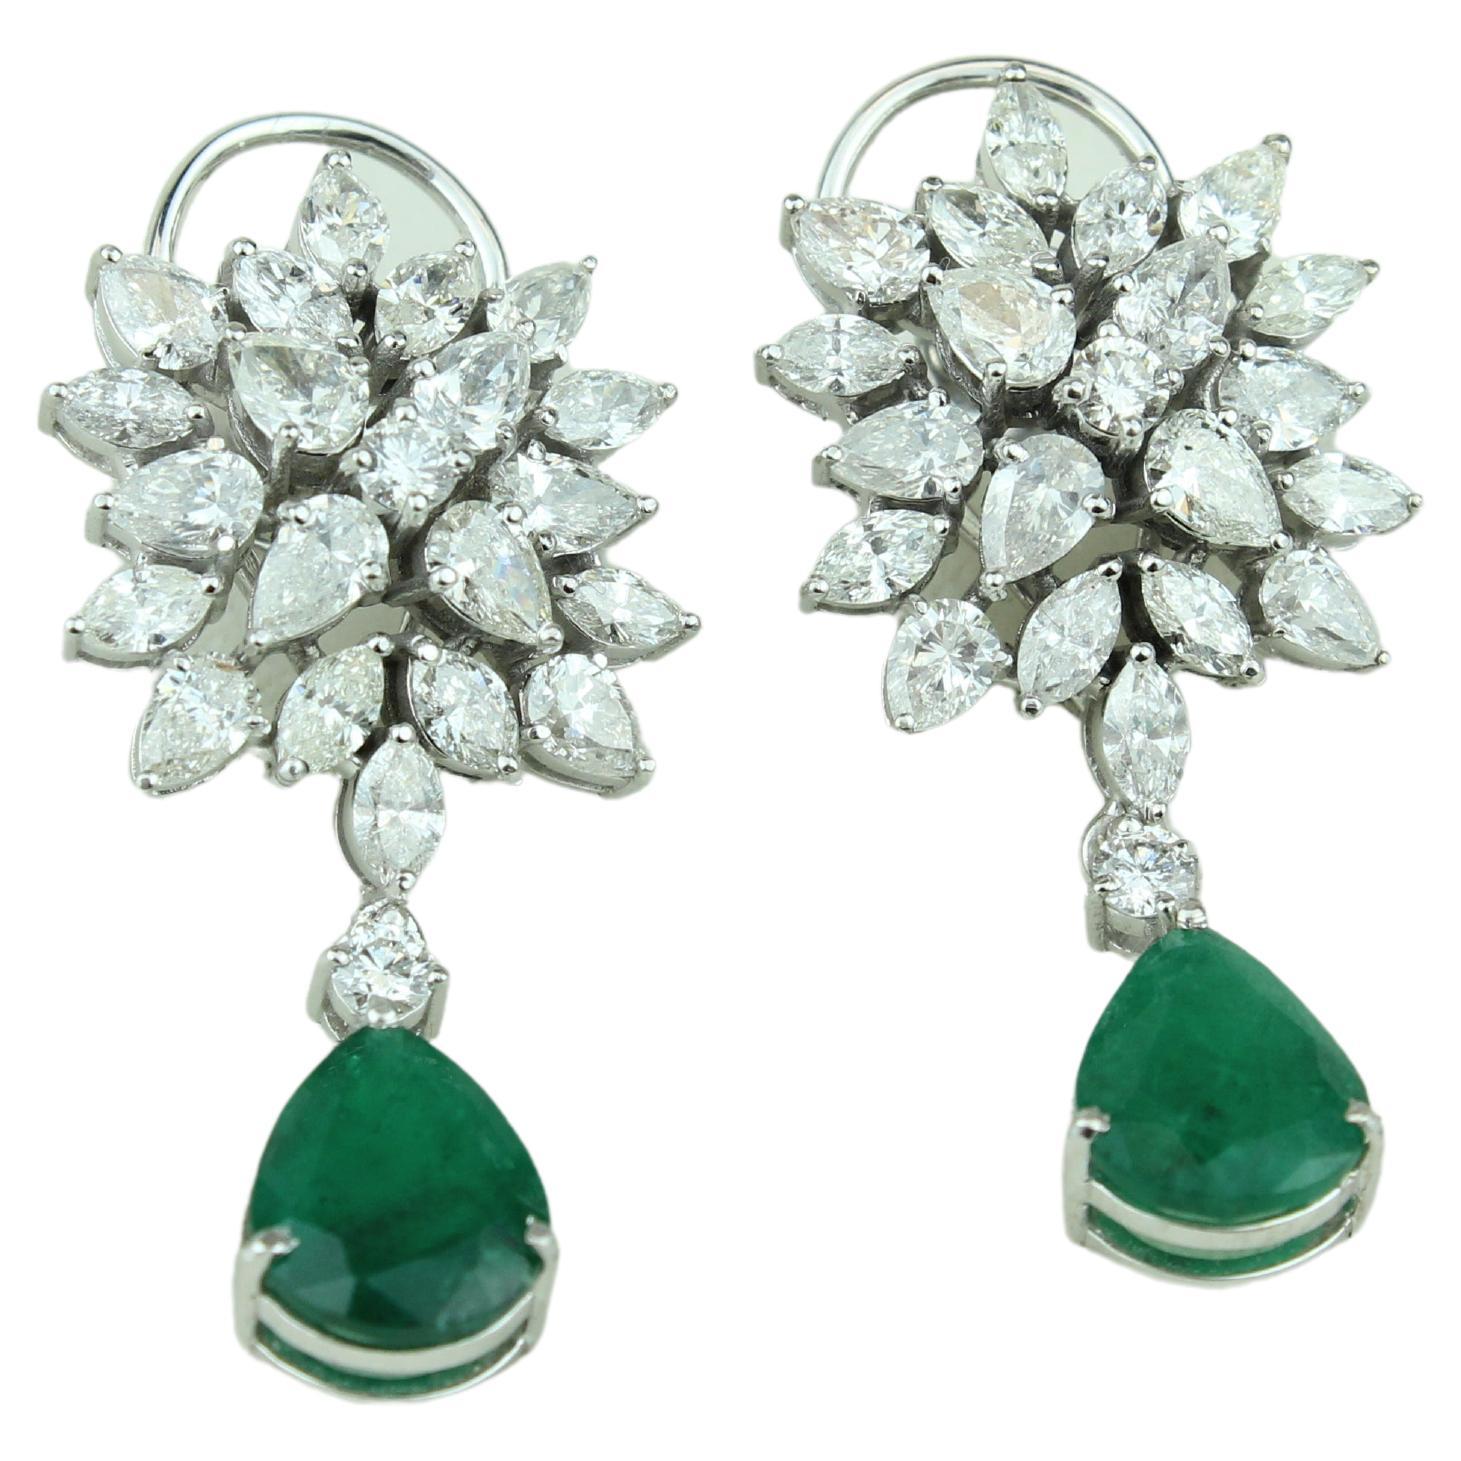 Marquise & Pear Diamond Earrings with an Emerald Drop in 18k Solid Gold